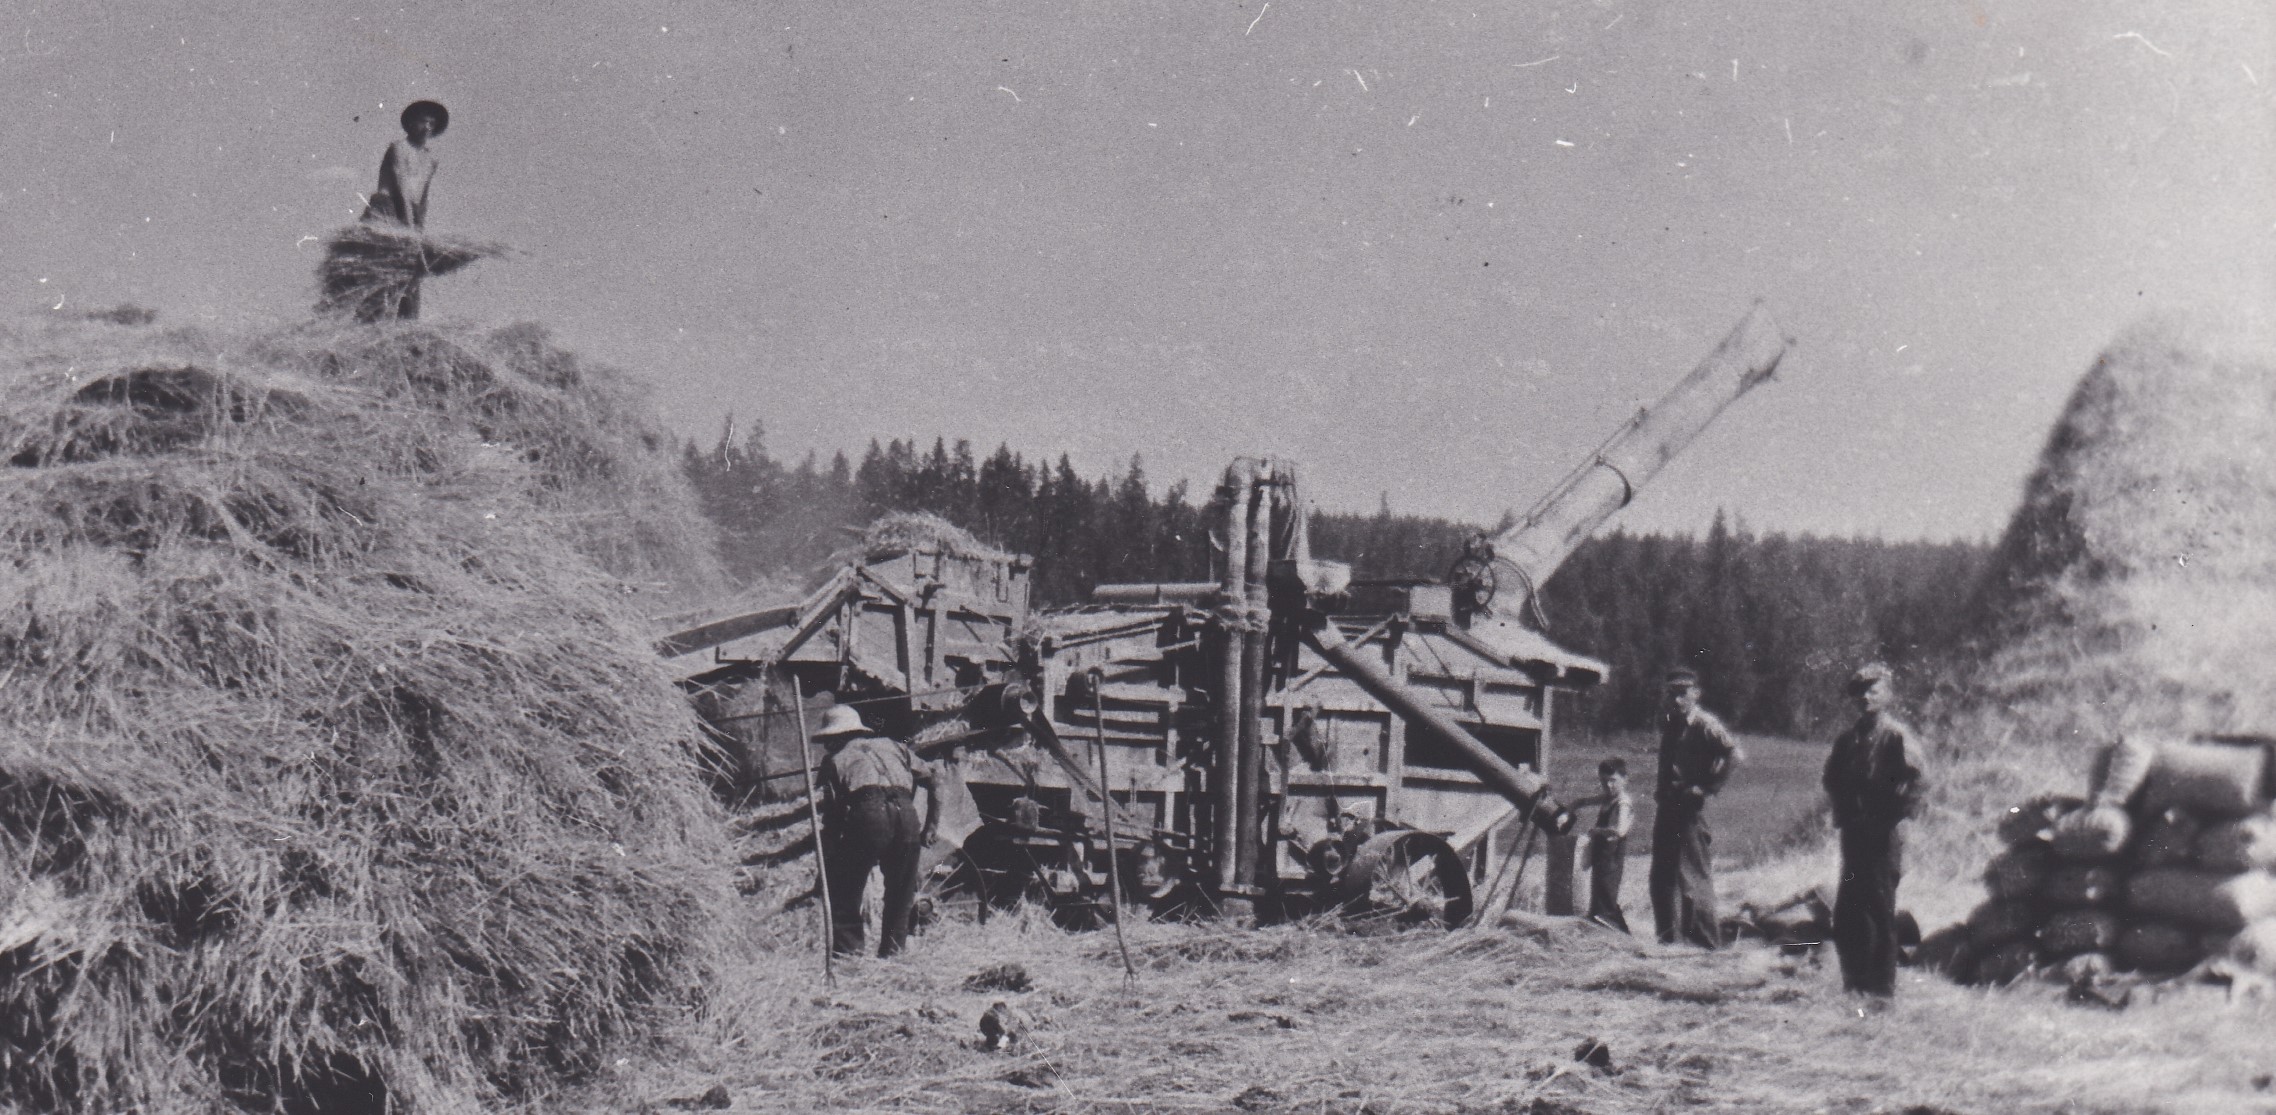 Several men and a small boy are using a threshing machine to harvest grain. A large pile of straw is on each side of the threshing machine. There is a large pile of bagged grain near the threshing machine.